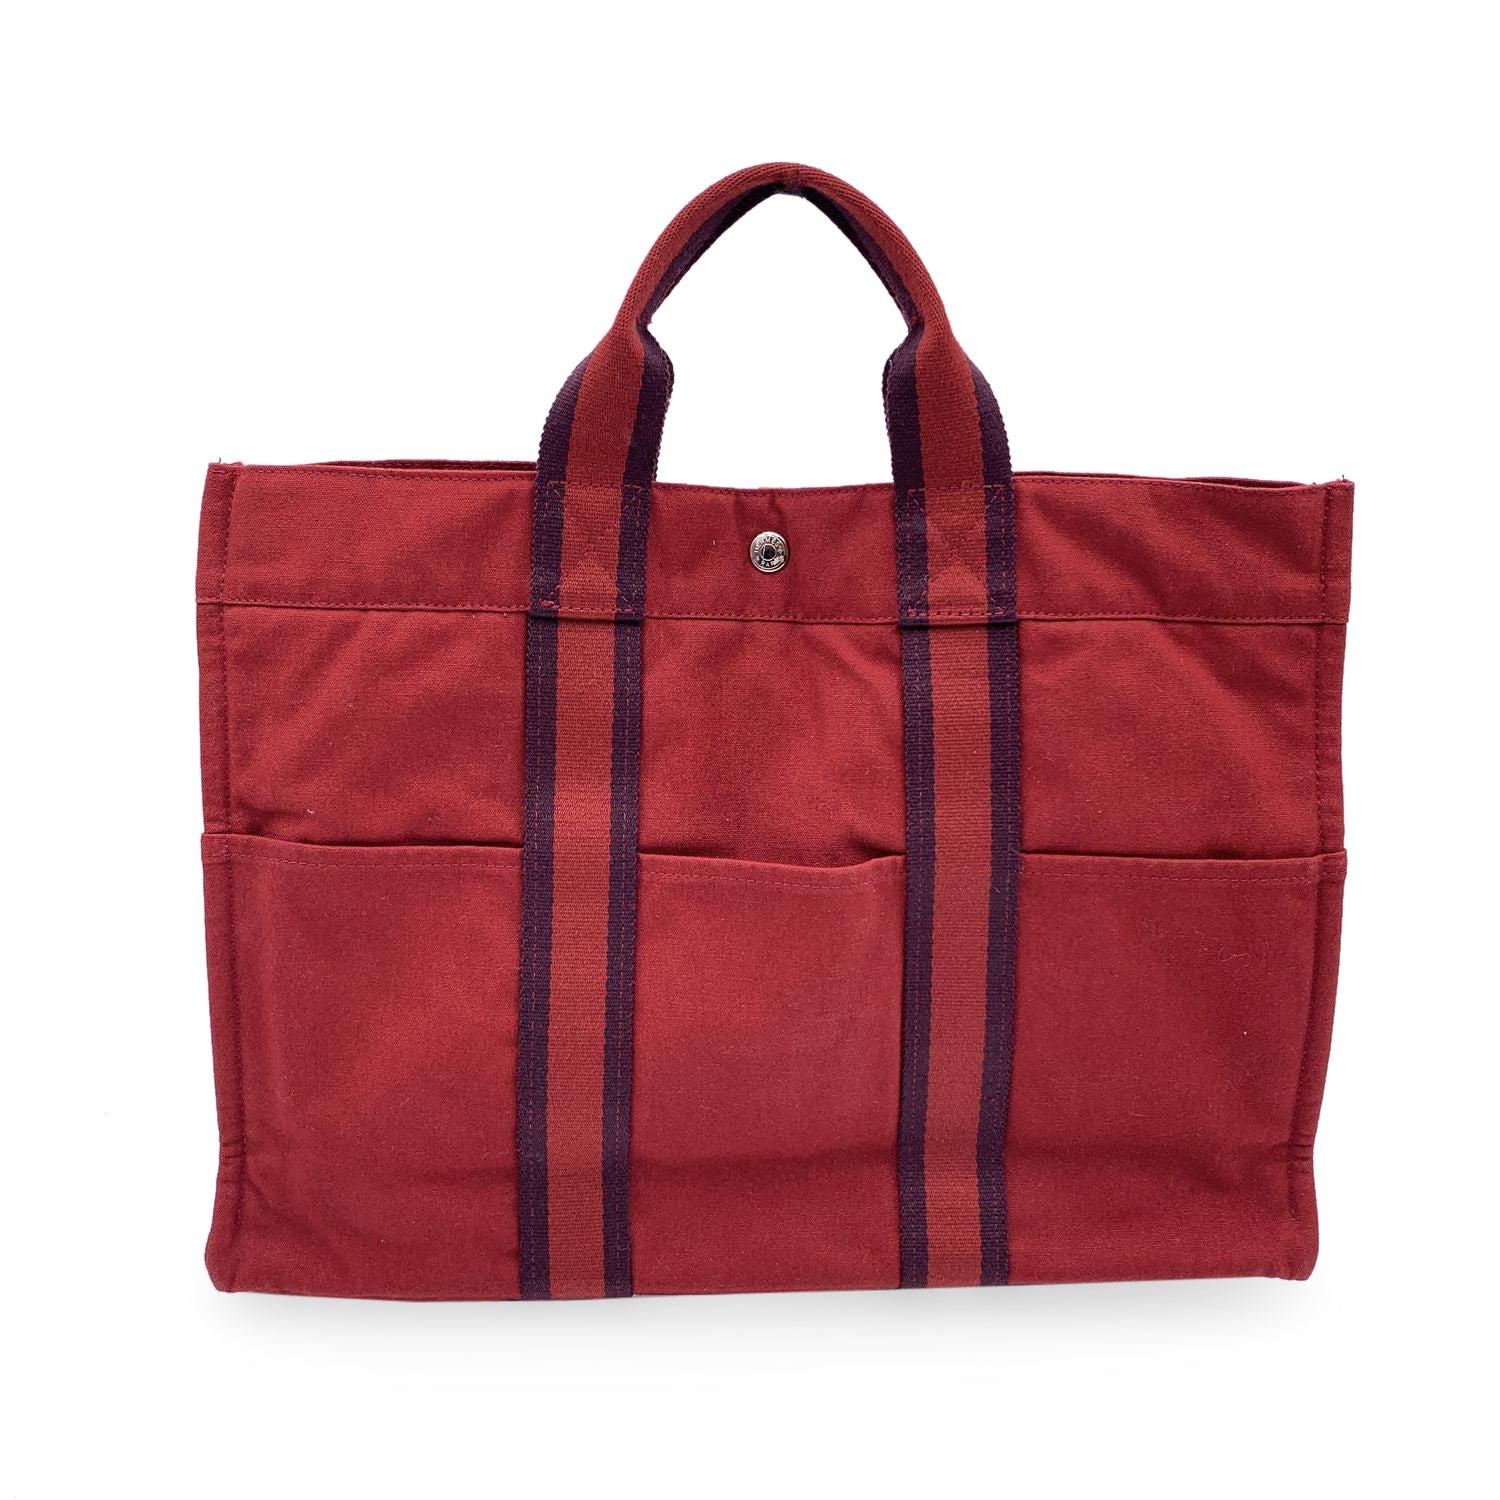 Hermes Paris Vintage Red Canvas Cotton Fourre Tout MM Bag Tote In Excellent Condition For Sale In Rome, Rome